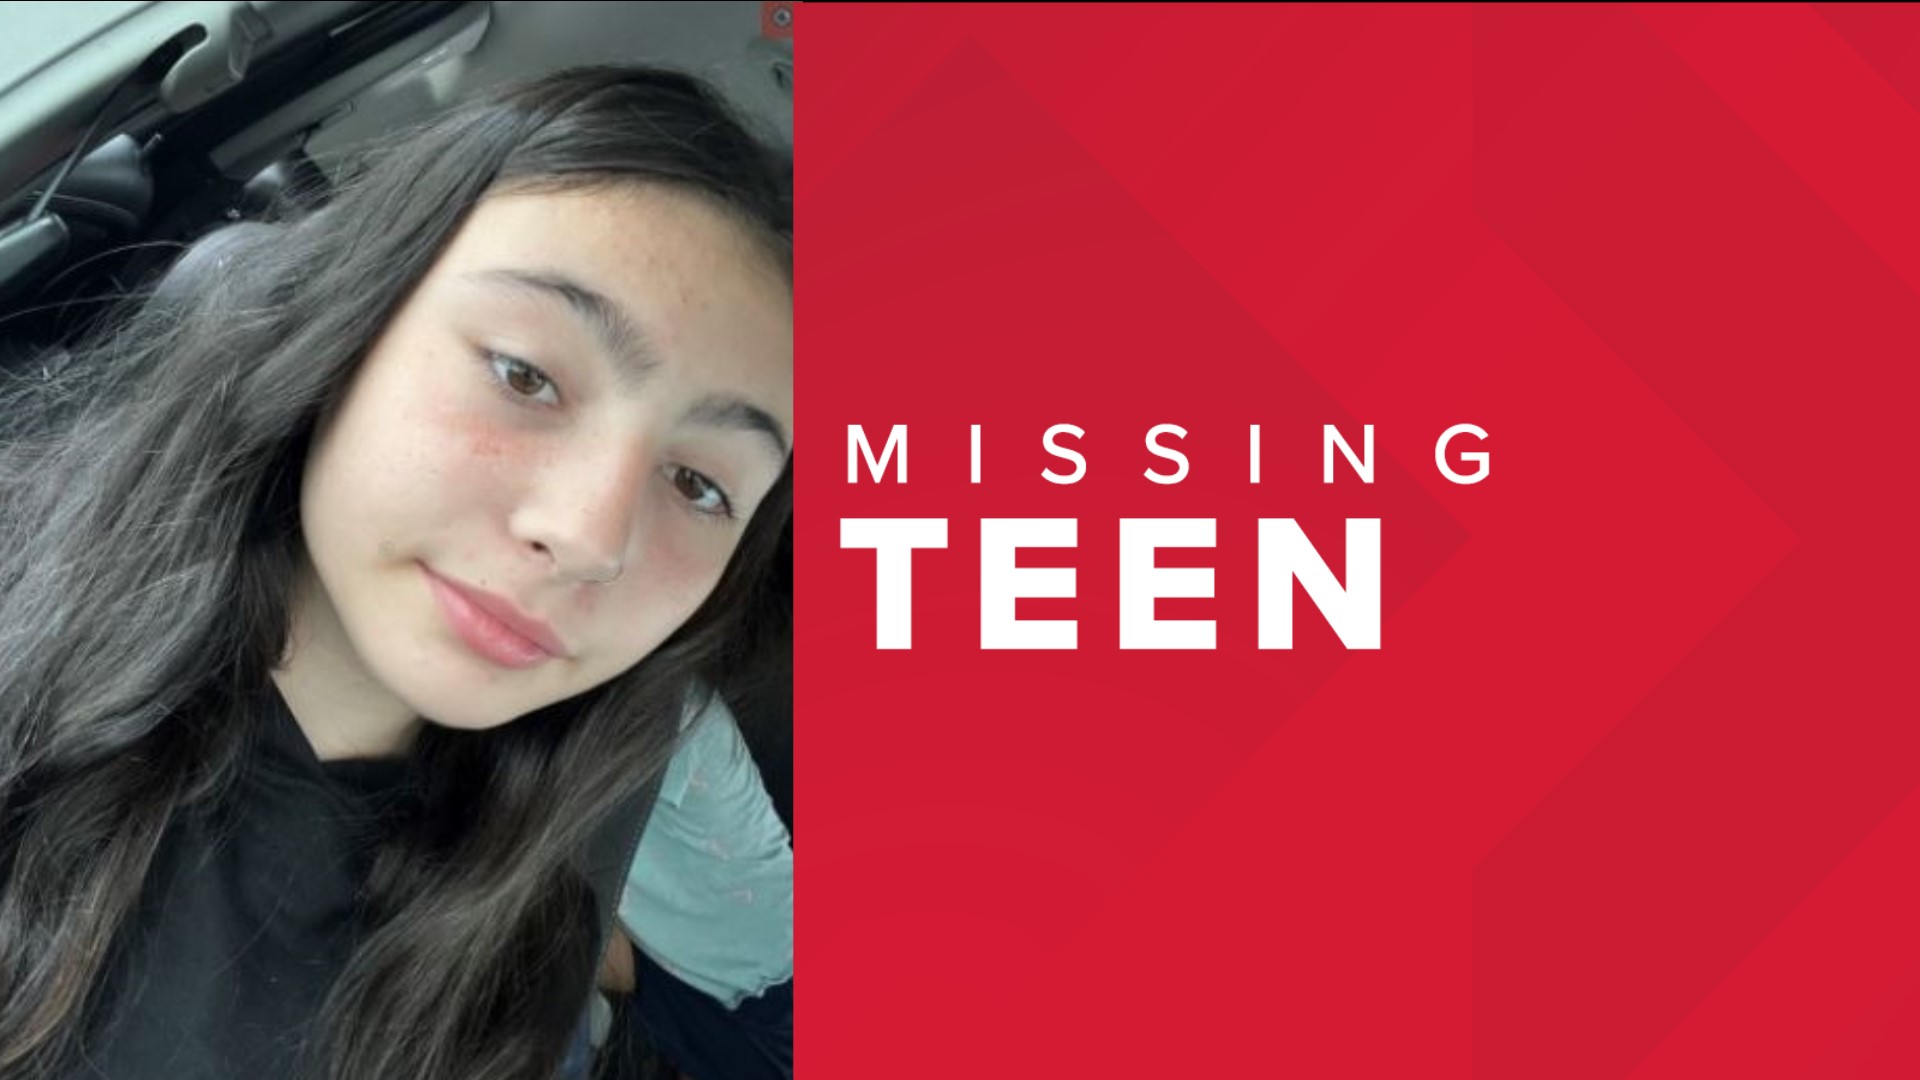 Batavia Police Asking For The Publics Assistance To Locate Missing 13 Year Old Girl